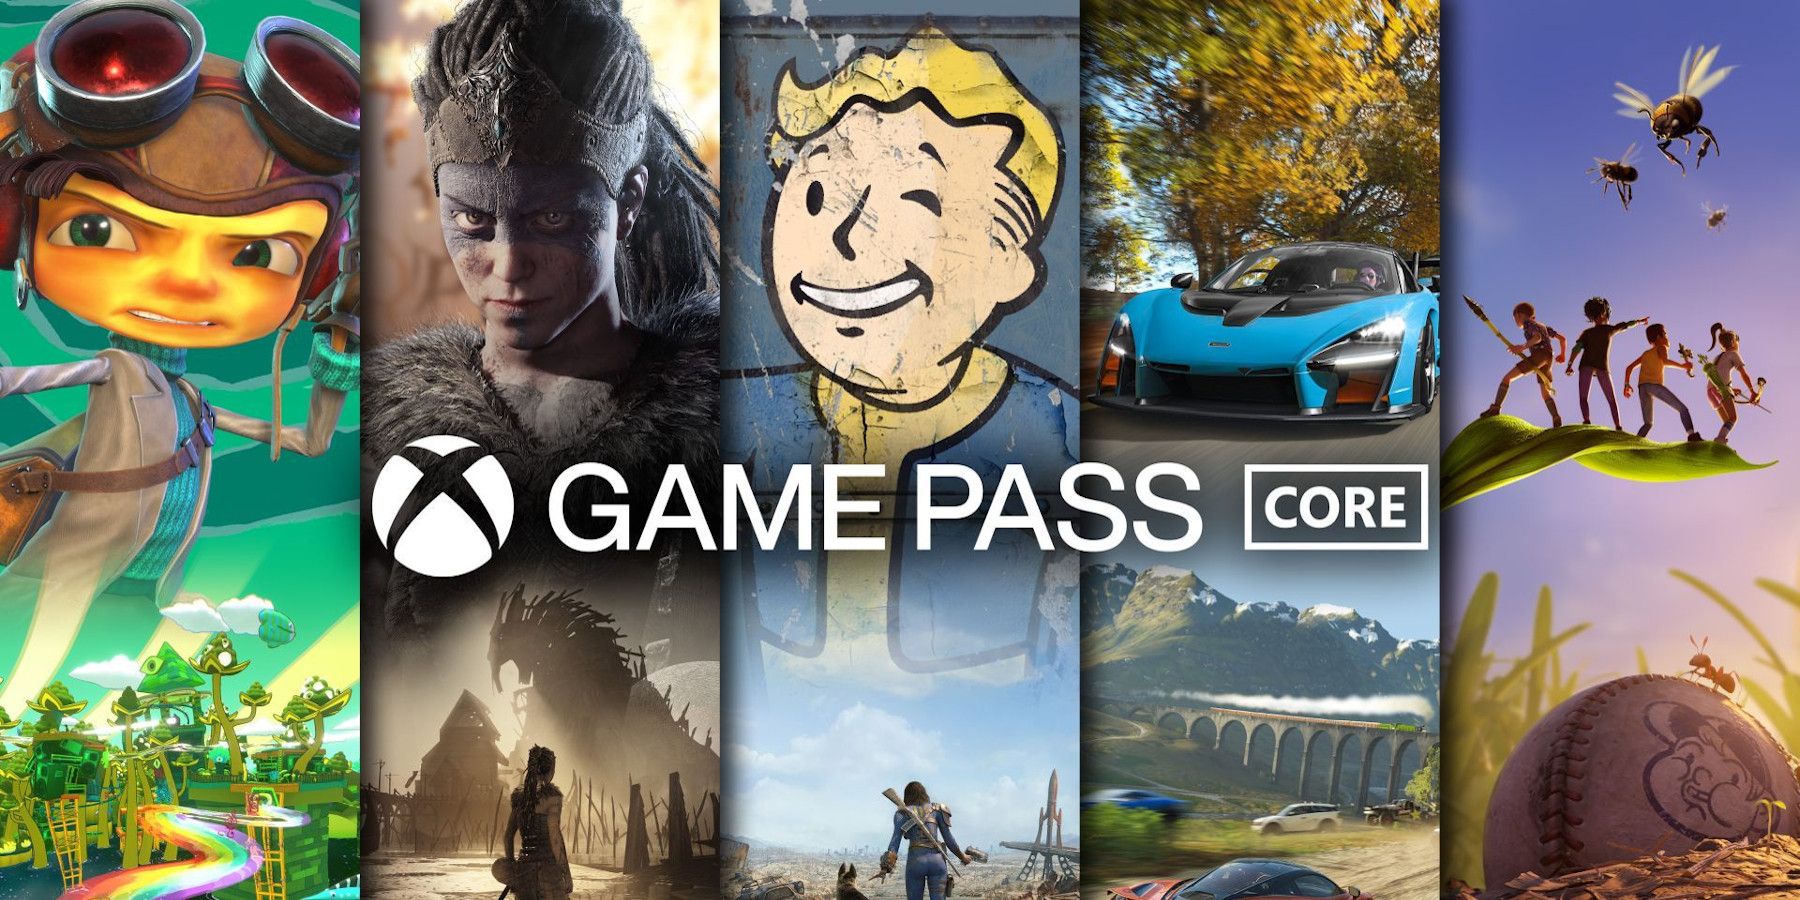 Multiple games included with Xbox Game Pass Core